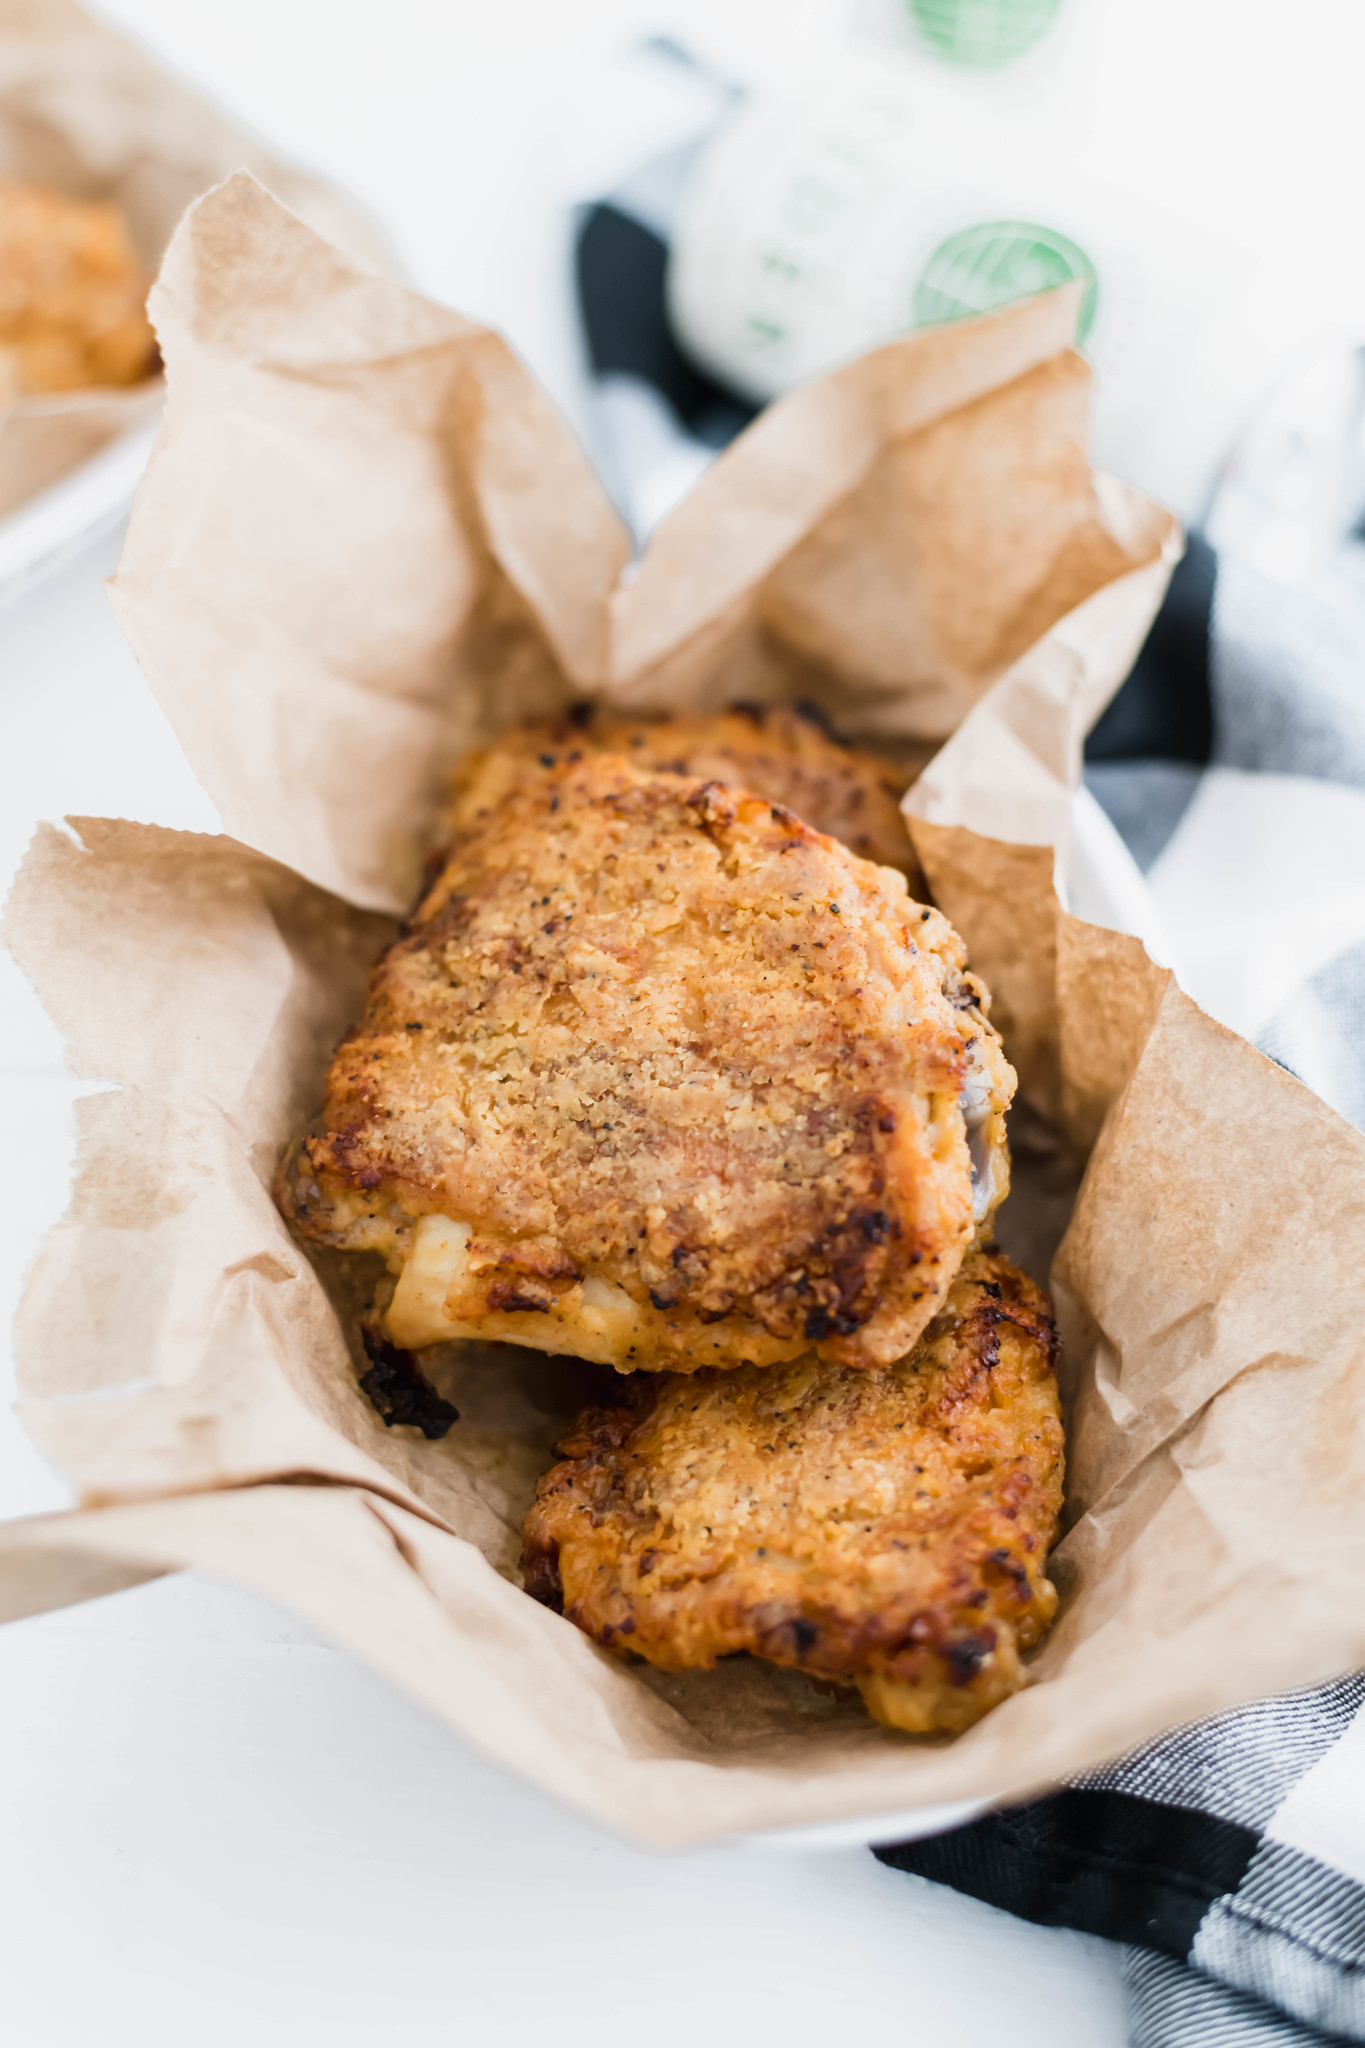 Love fried chicken but hate frying food at home?! This Oven Fried Chicken is perfeclty crispy, juicy and super flavorful. Perfectly spiced and super tender from a buttermilk marinade.